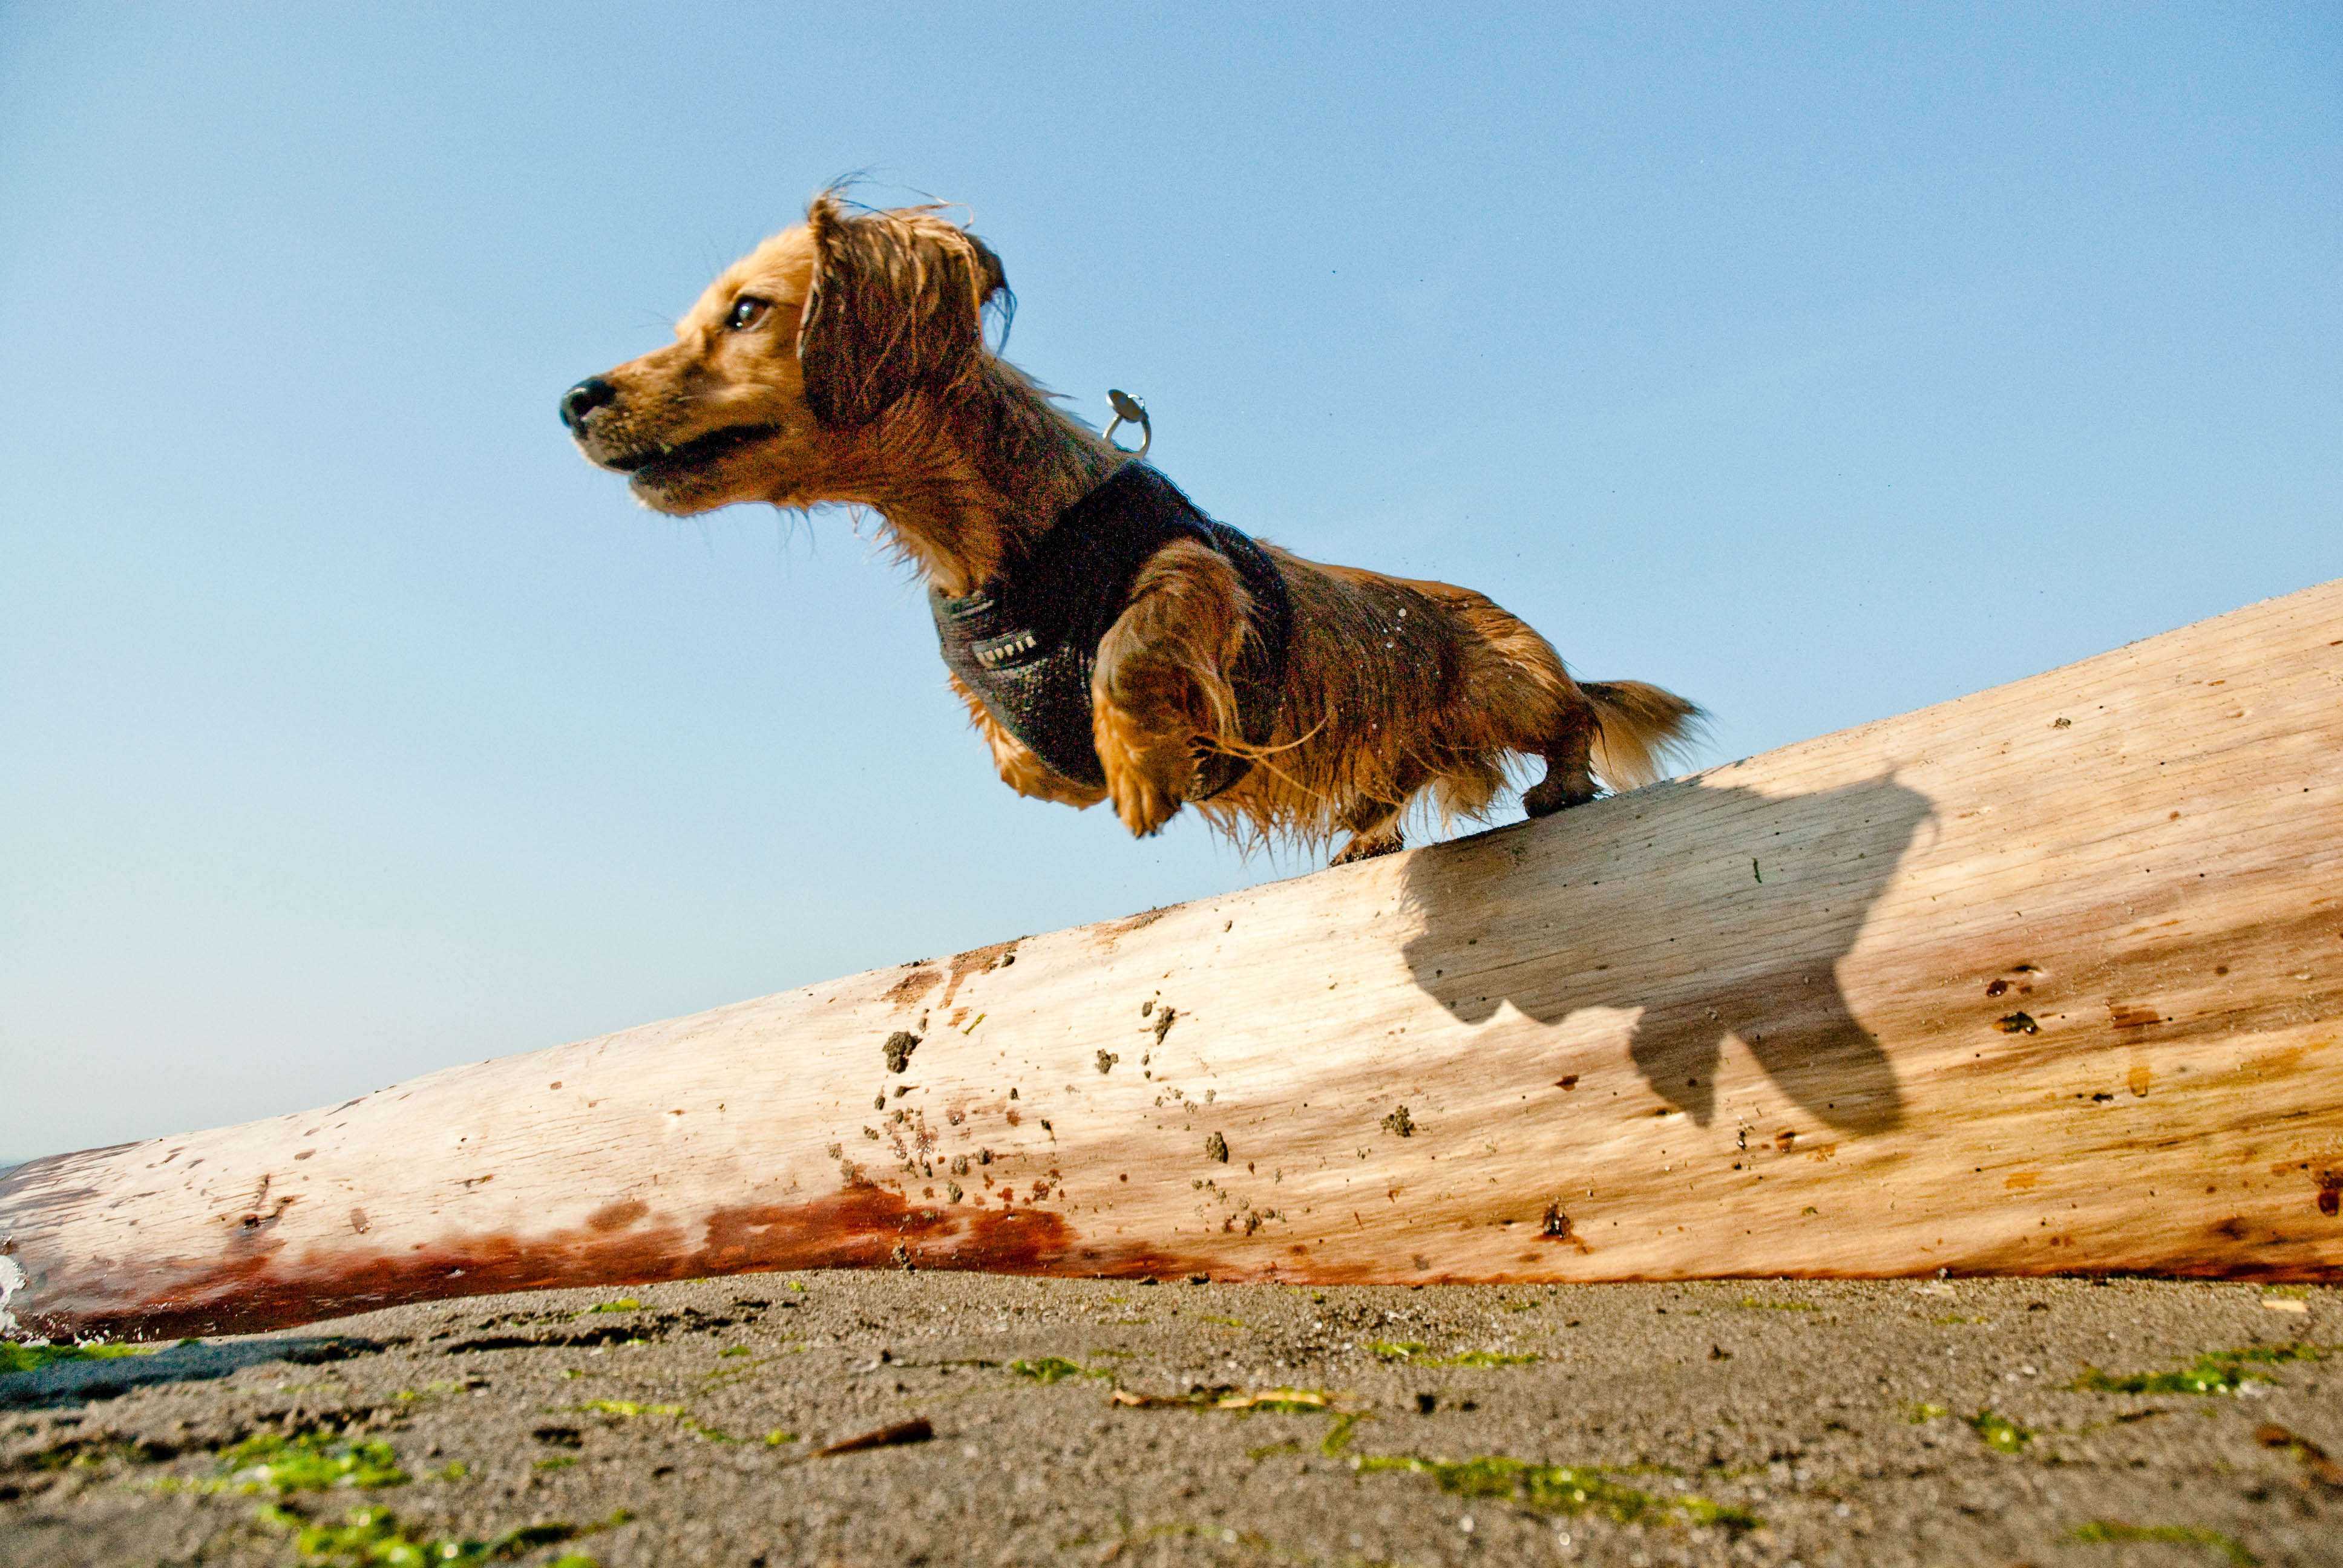 Dachshund leaping from log